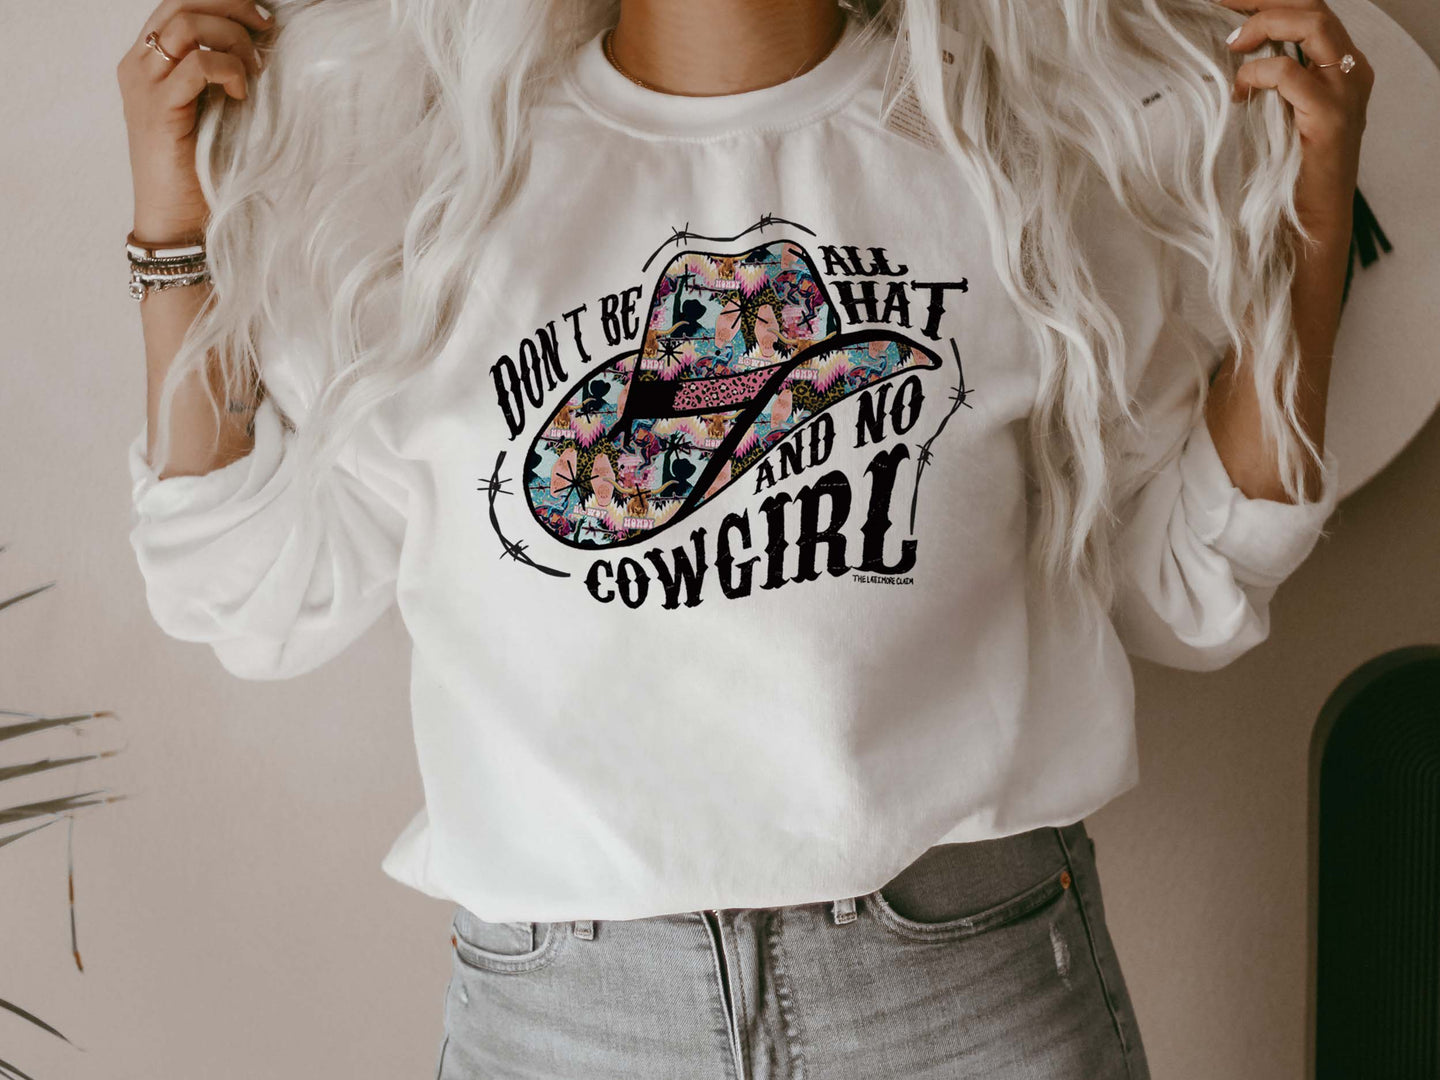 MISSMUDPIE Don't Be All Hat And No Cowgirl - WHITE SWEATSHIRT - ON SALE THROUGH 5/30